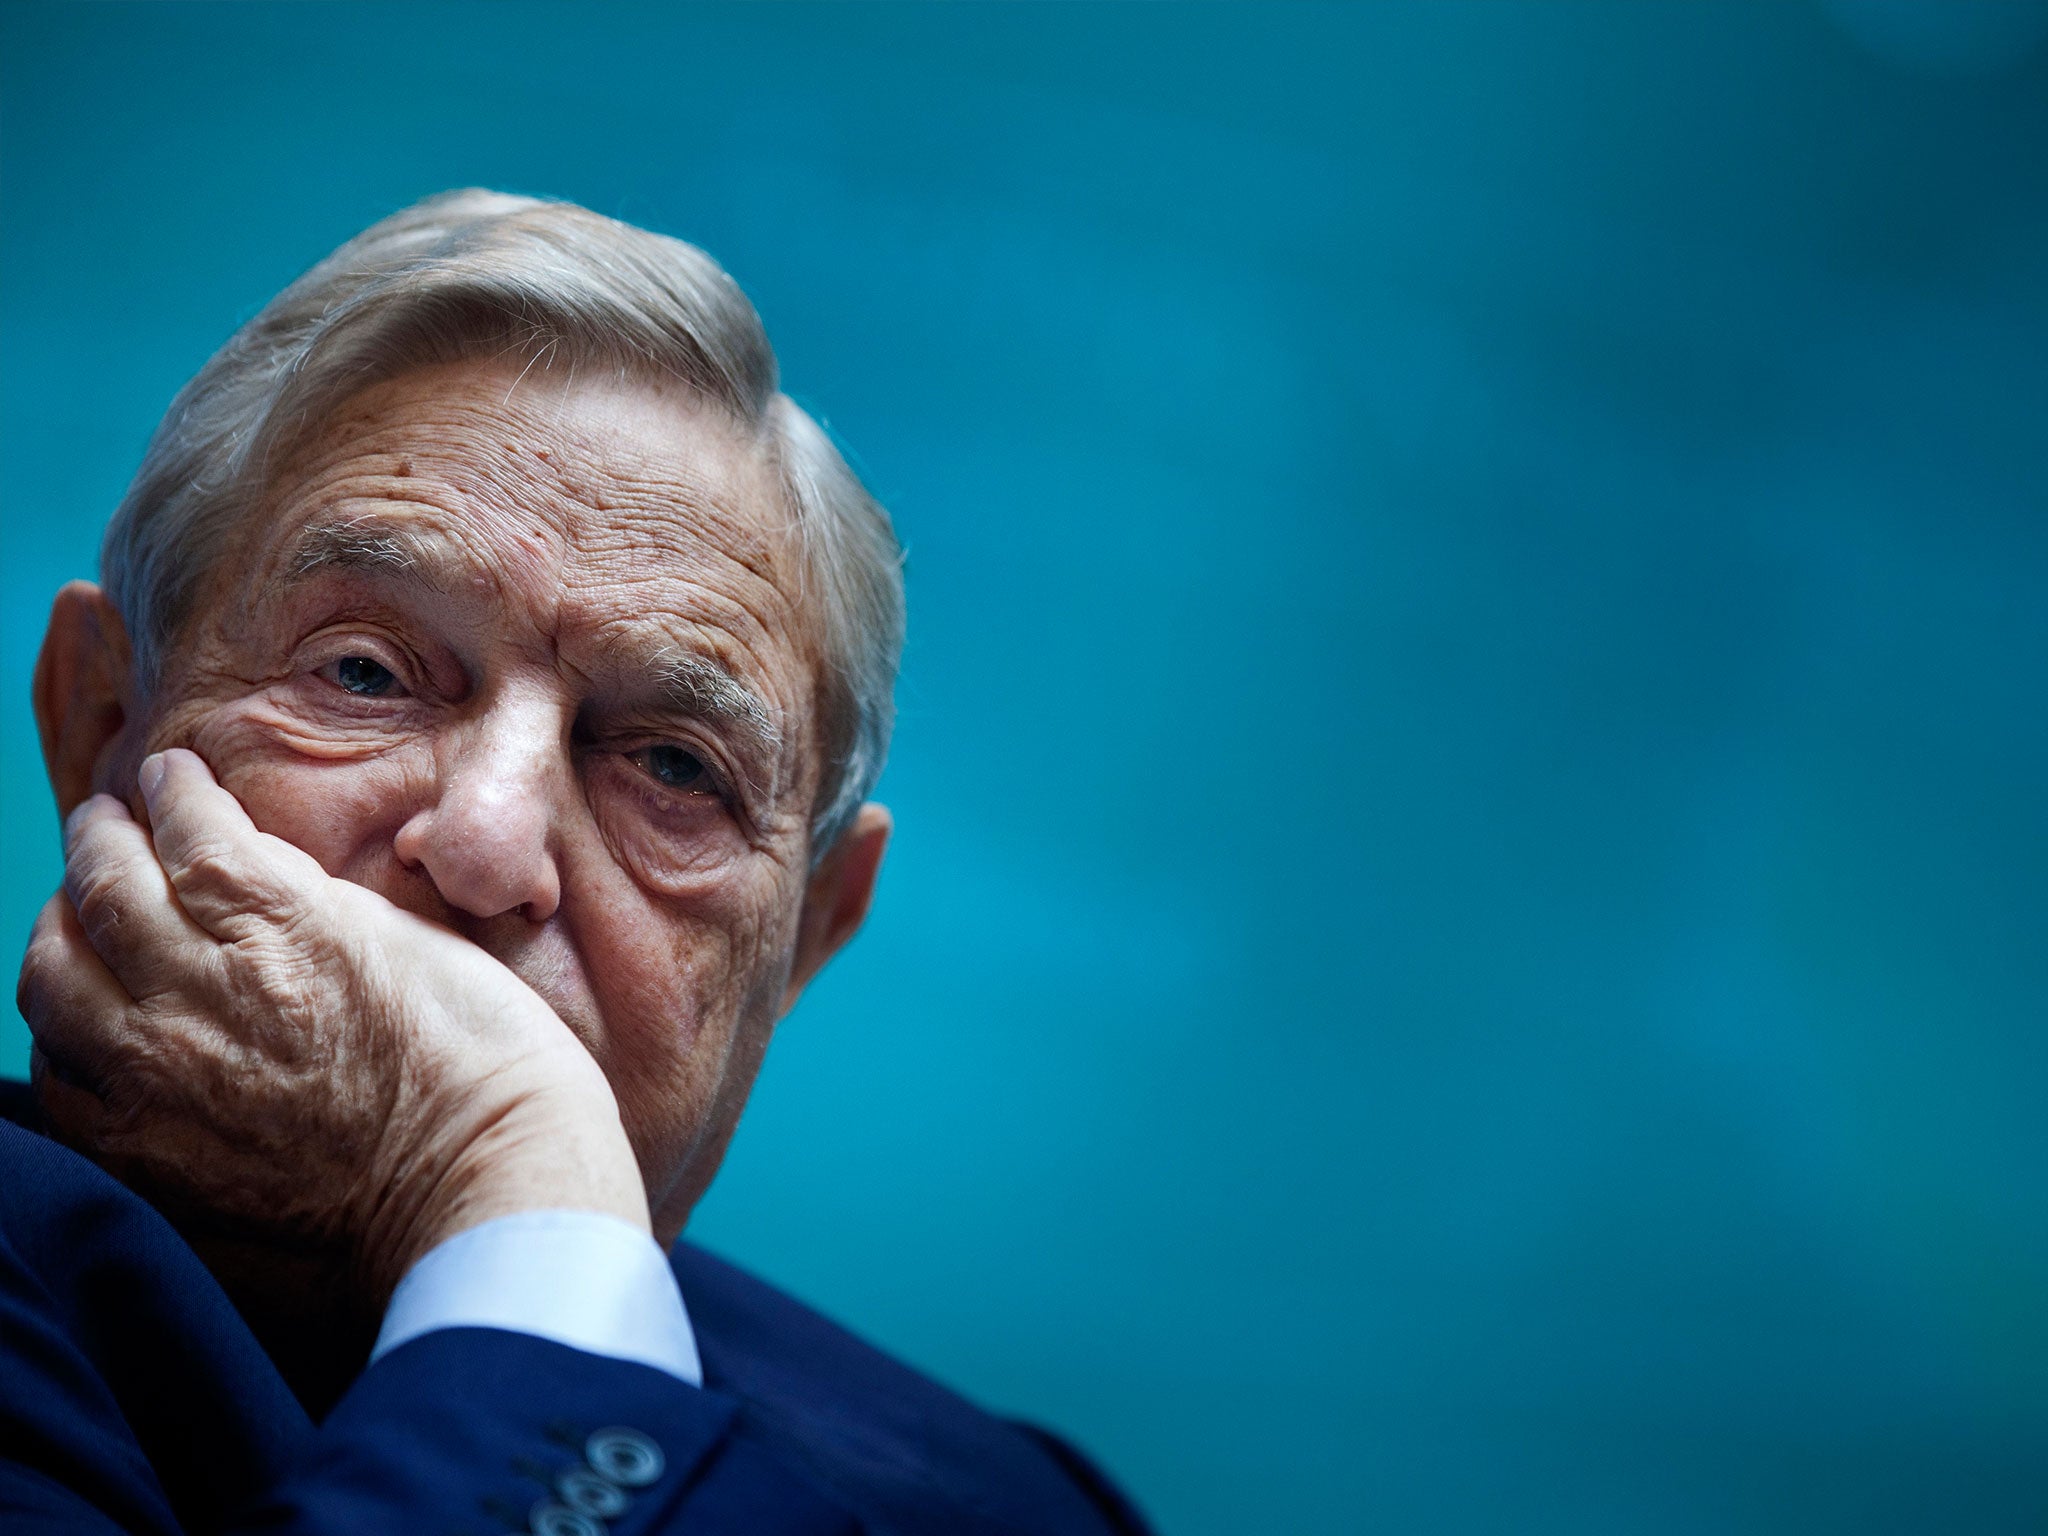 George Soros seemed to have become the conspiracy theorist's target of choice